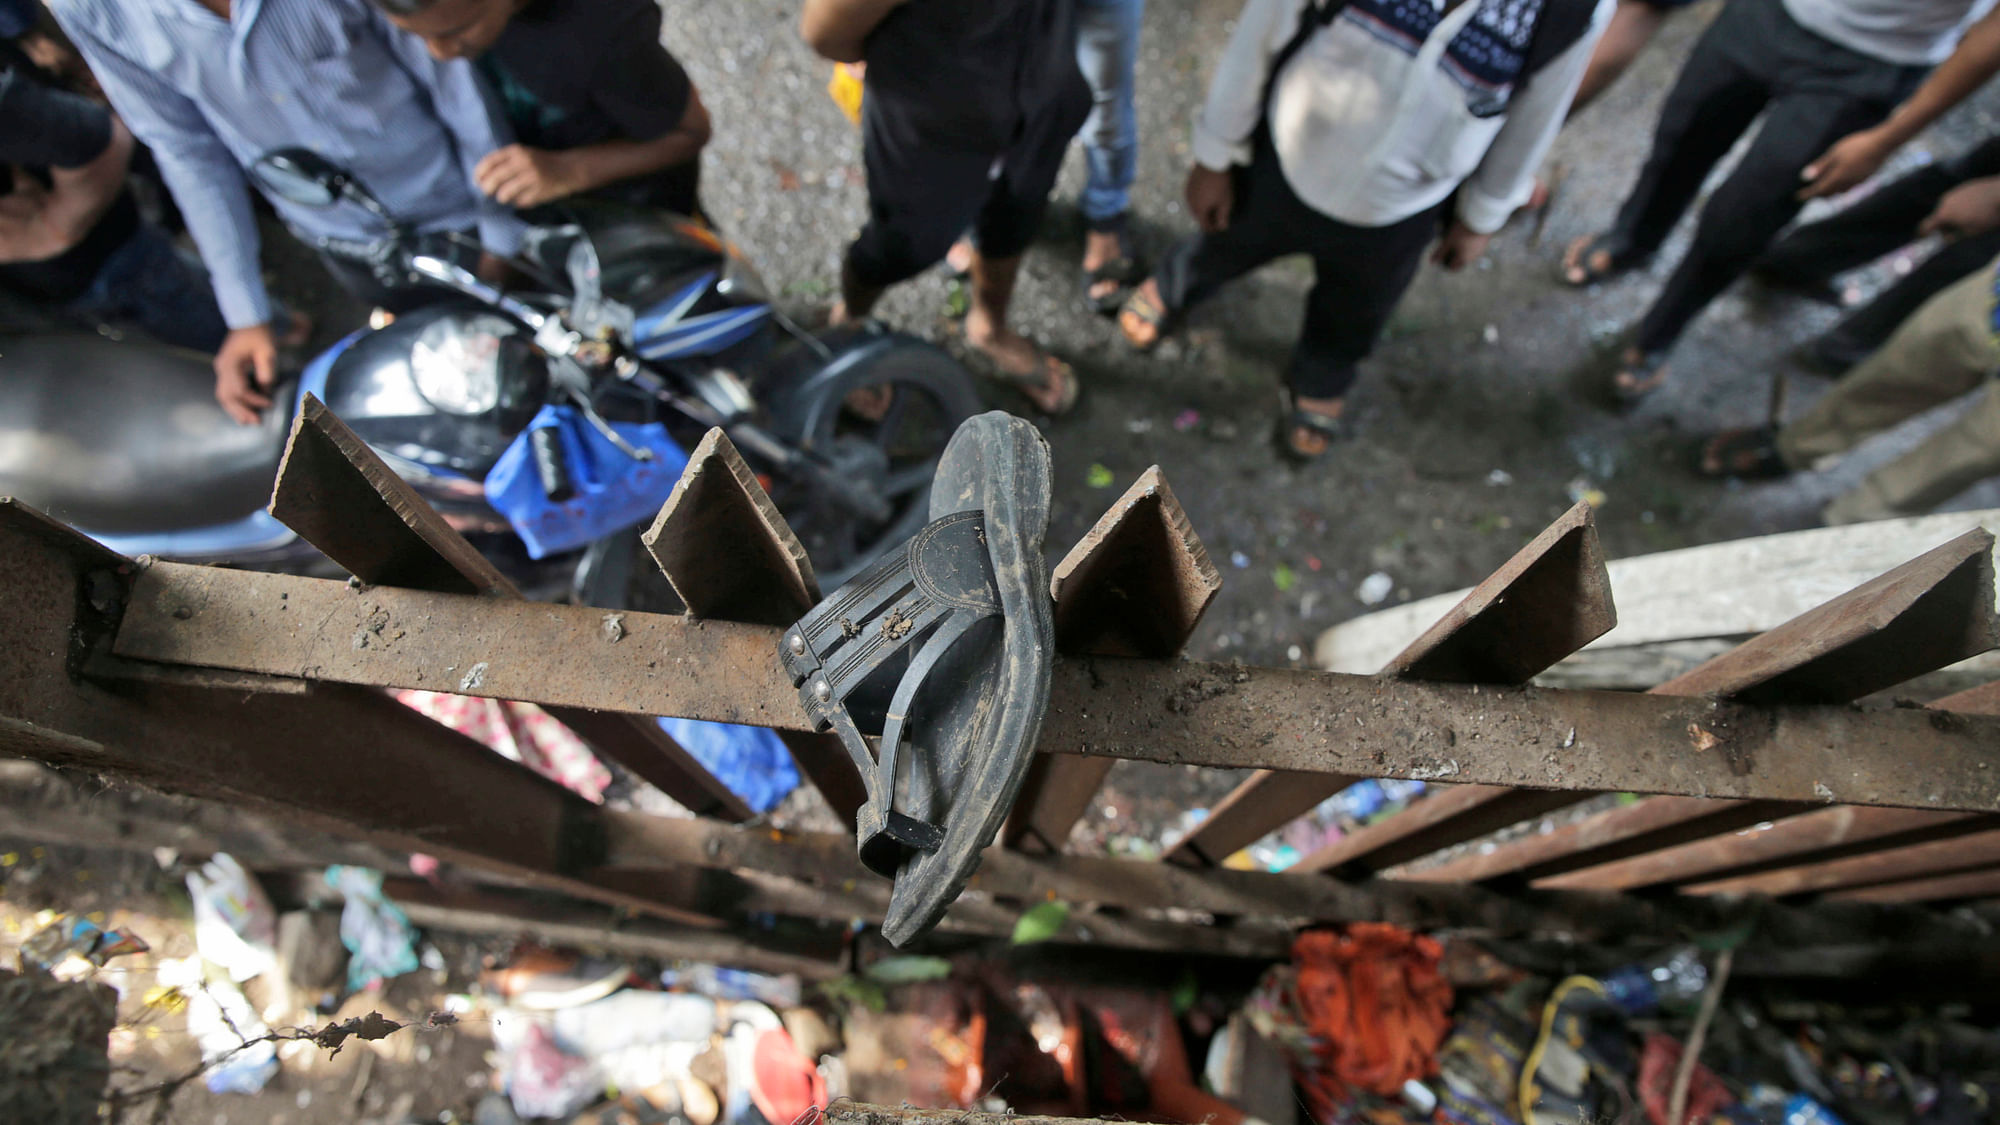 File image of a a victim’s sandal stuck on the fence of the Elphinstone Road station.